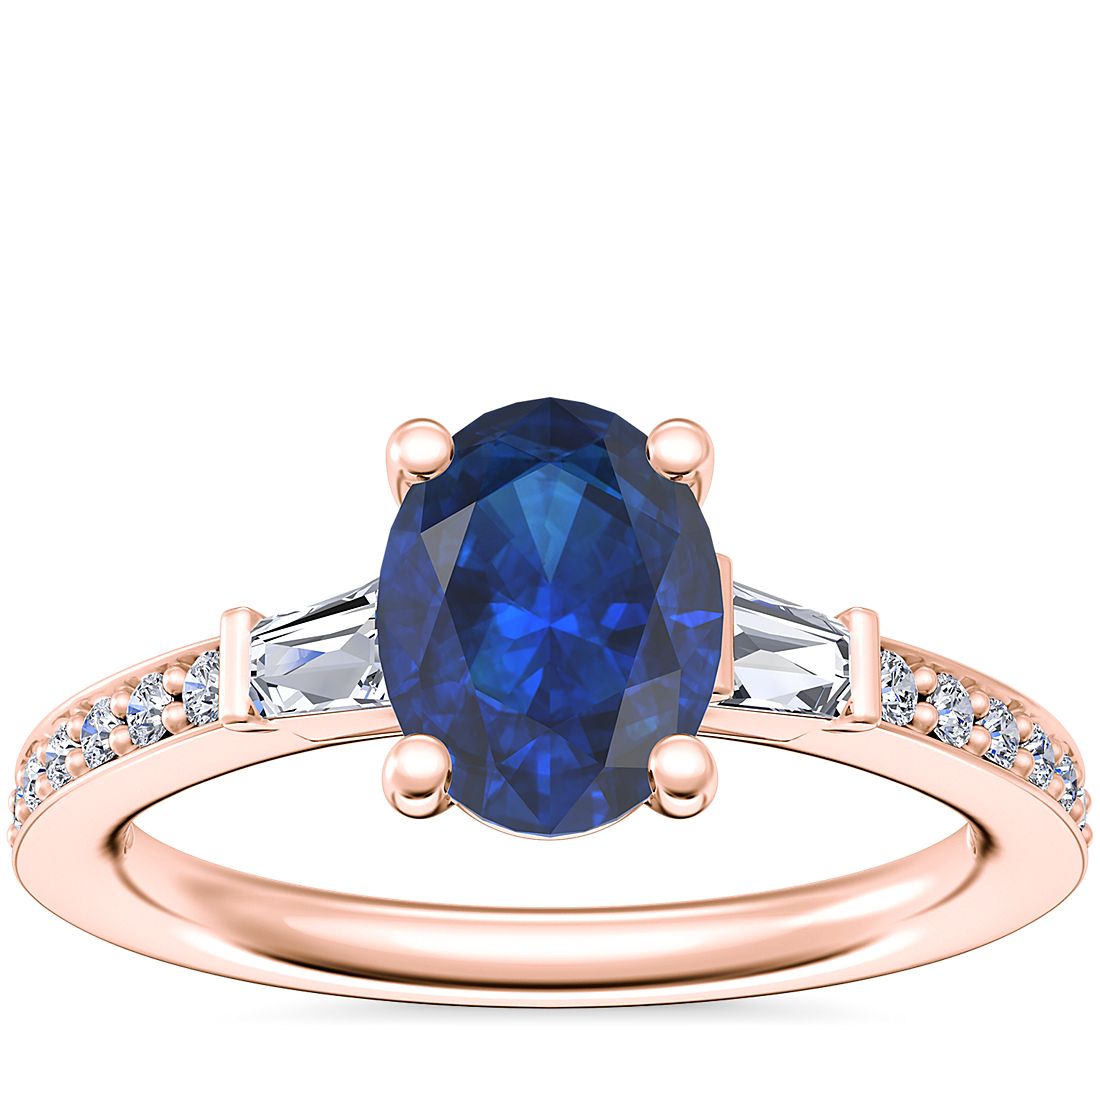 Tapered Baguette Diamond Cathedral Engagement Ring with Oval Sapphire in 14k Rose Gold (8x6mm)